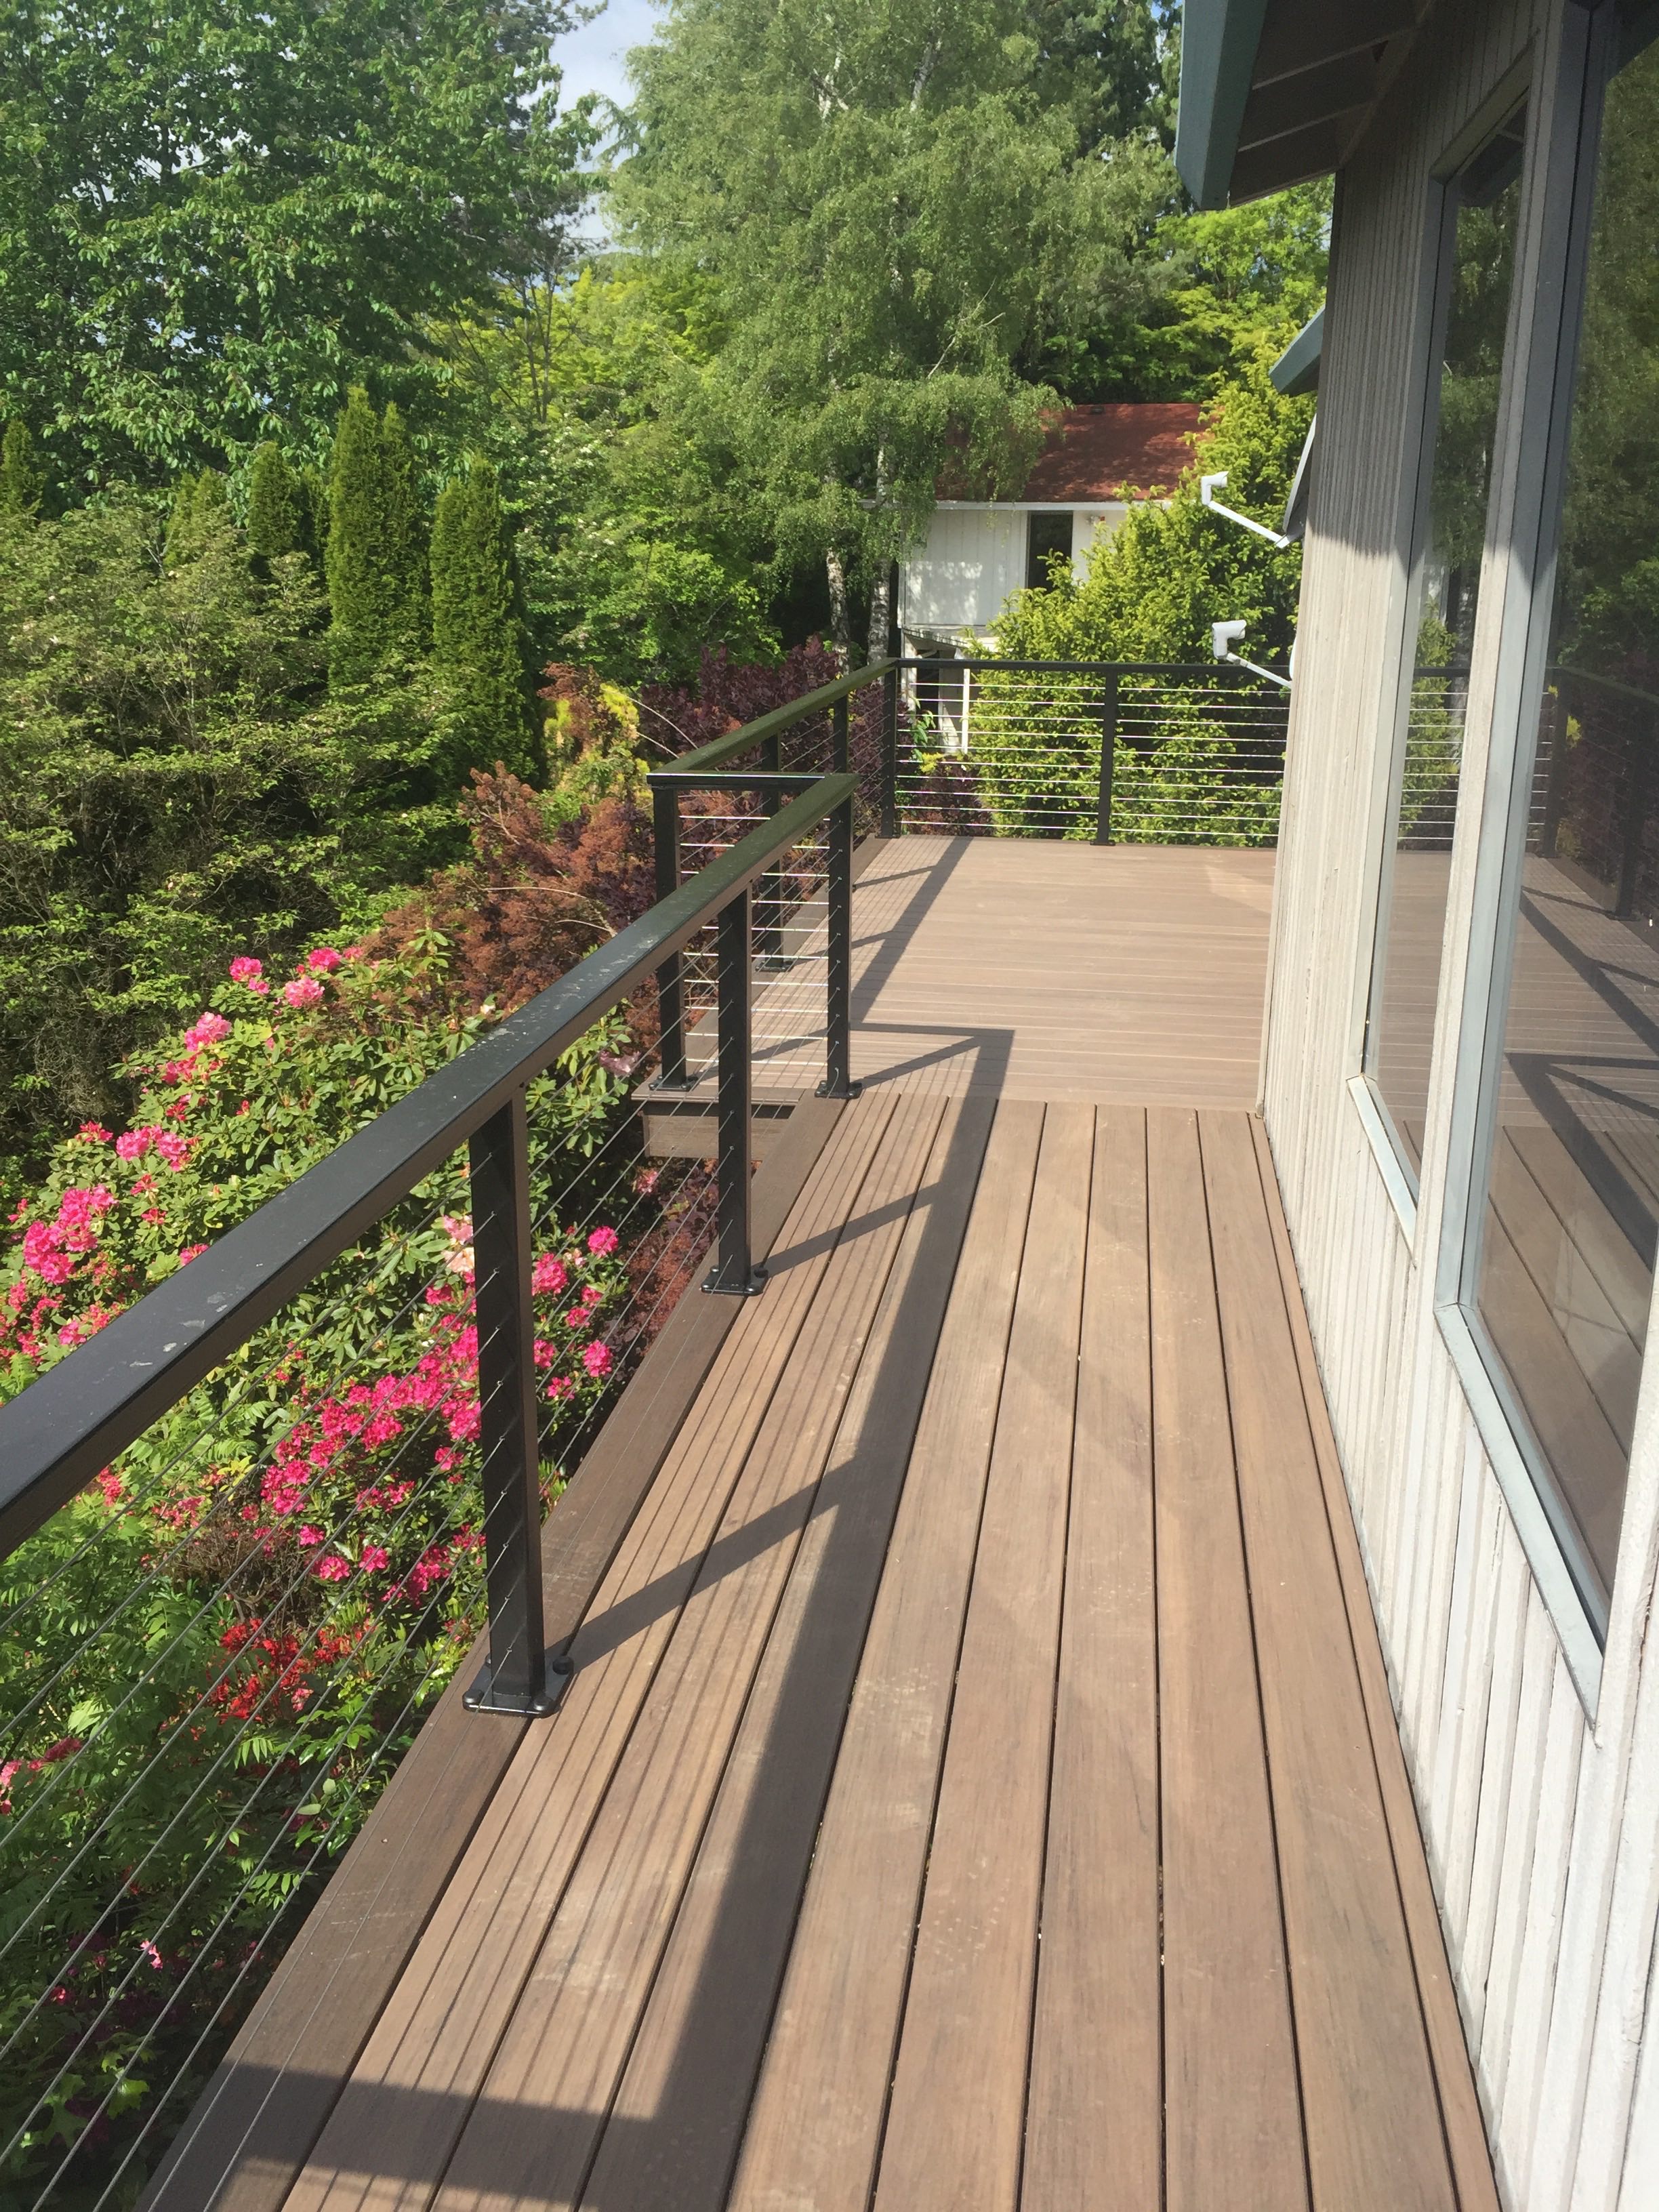 Alumarail, cable and composite decking